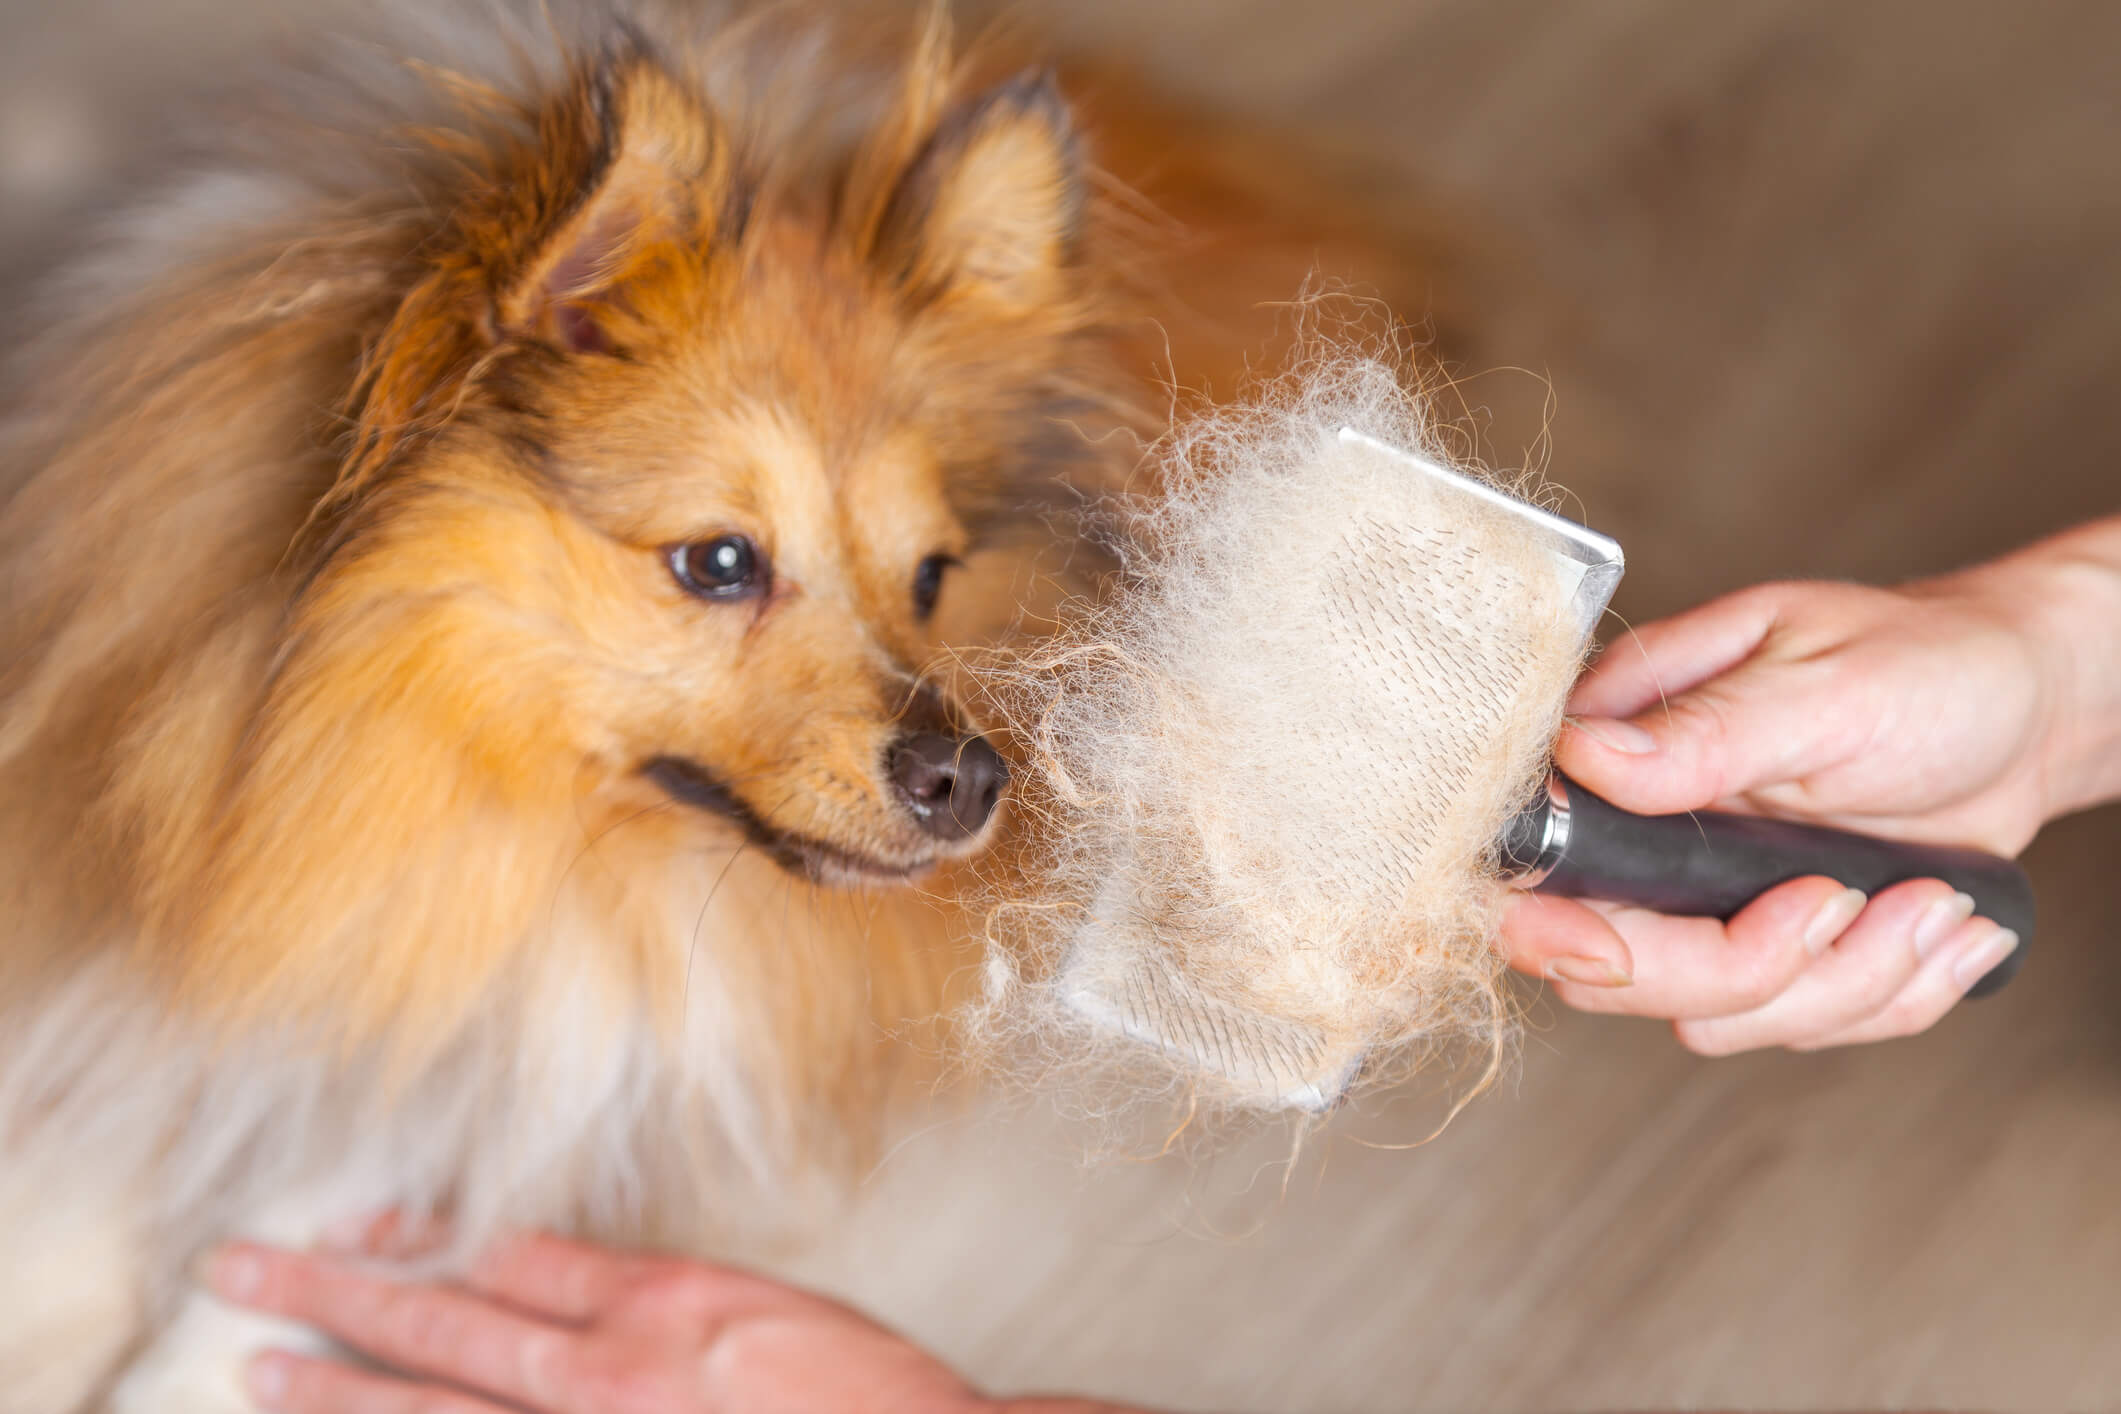 Pet Grooming 101: Do's and Don'ts of Grooming You Pup - Travall Blog Website